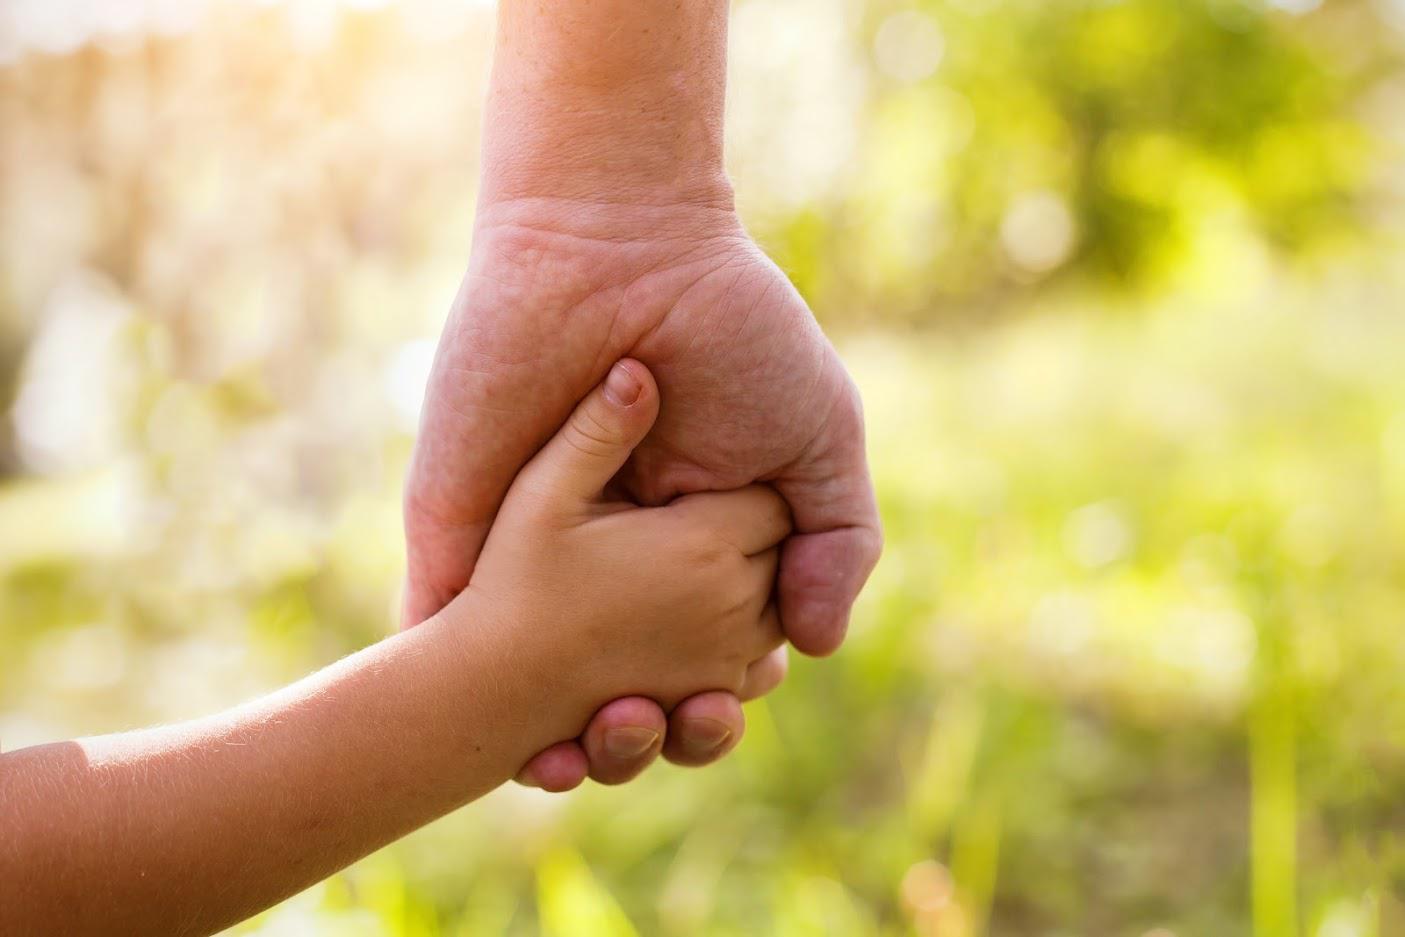 5 Strategies to Help You Feel Right About Adoption